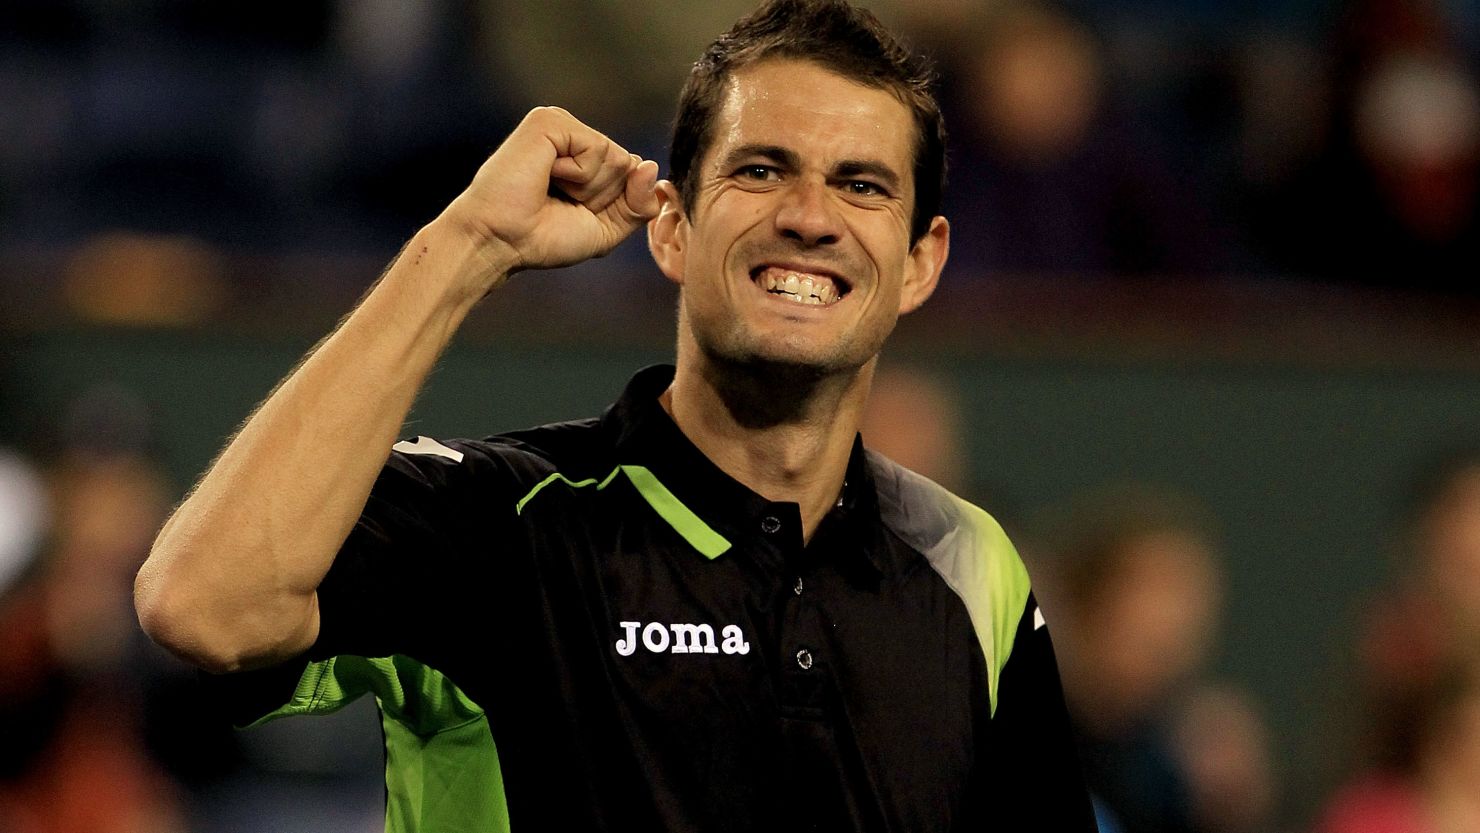 Guillermo Garcia-Lopez celebrates his comfortable straight sets victory over fourth seed Andy Murray in California.